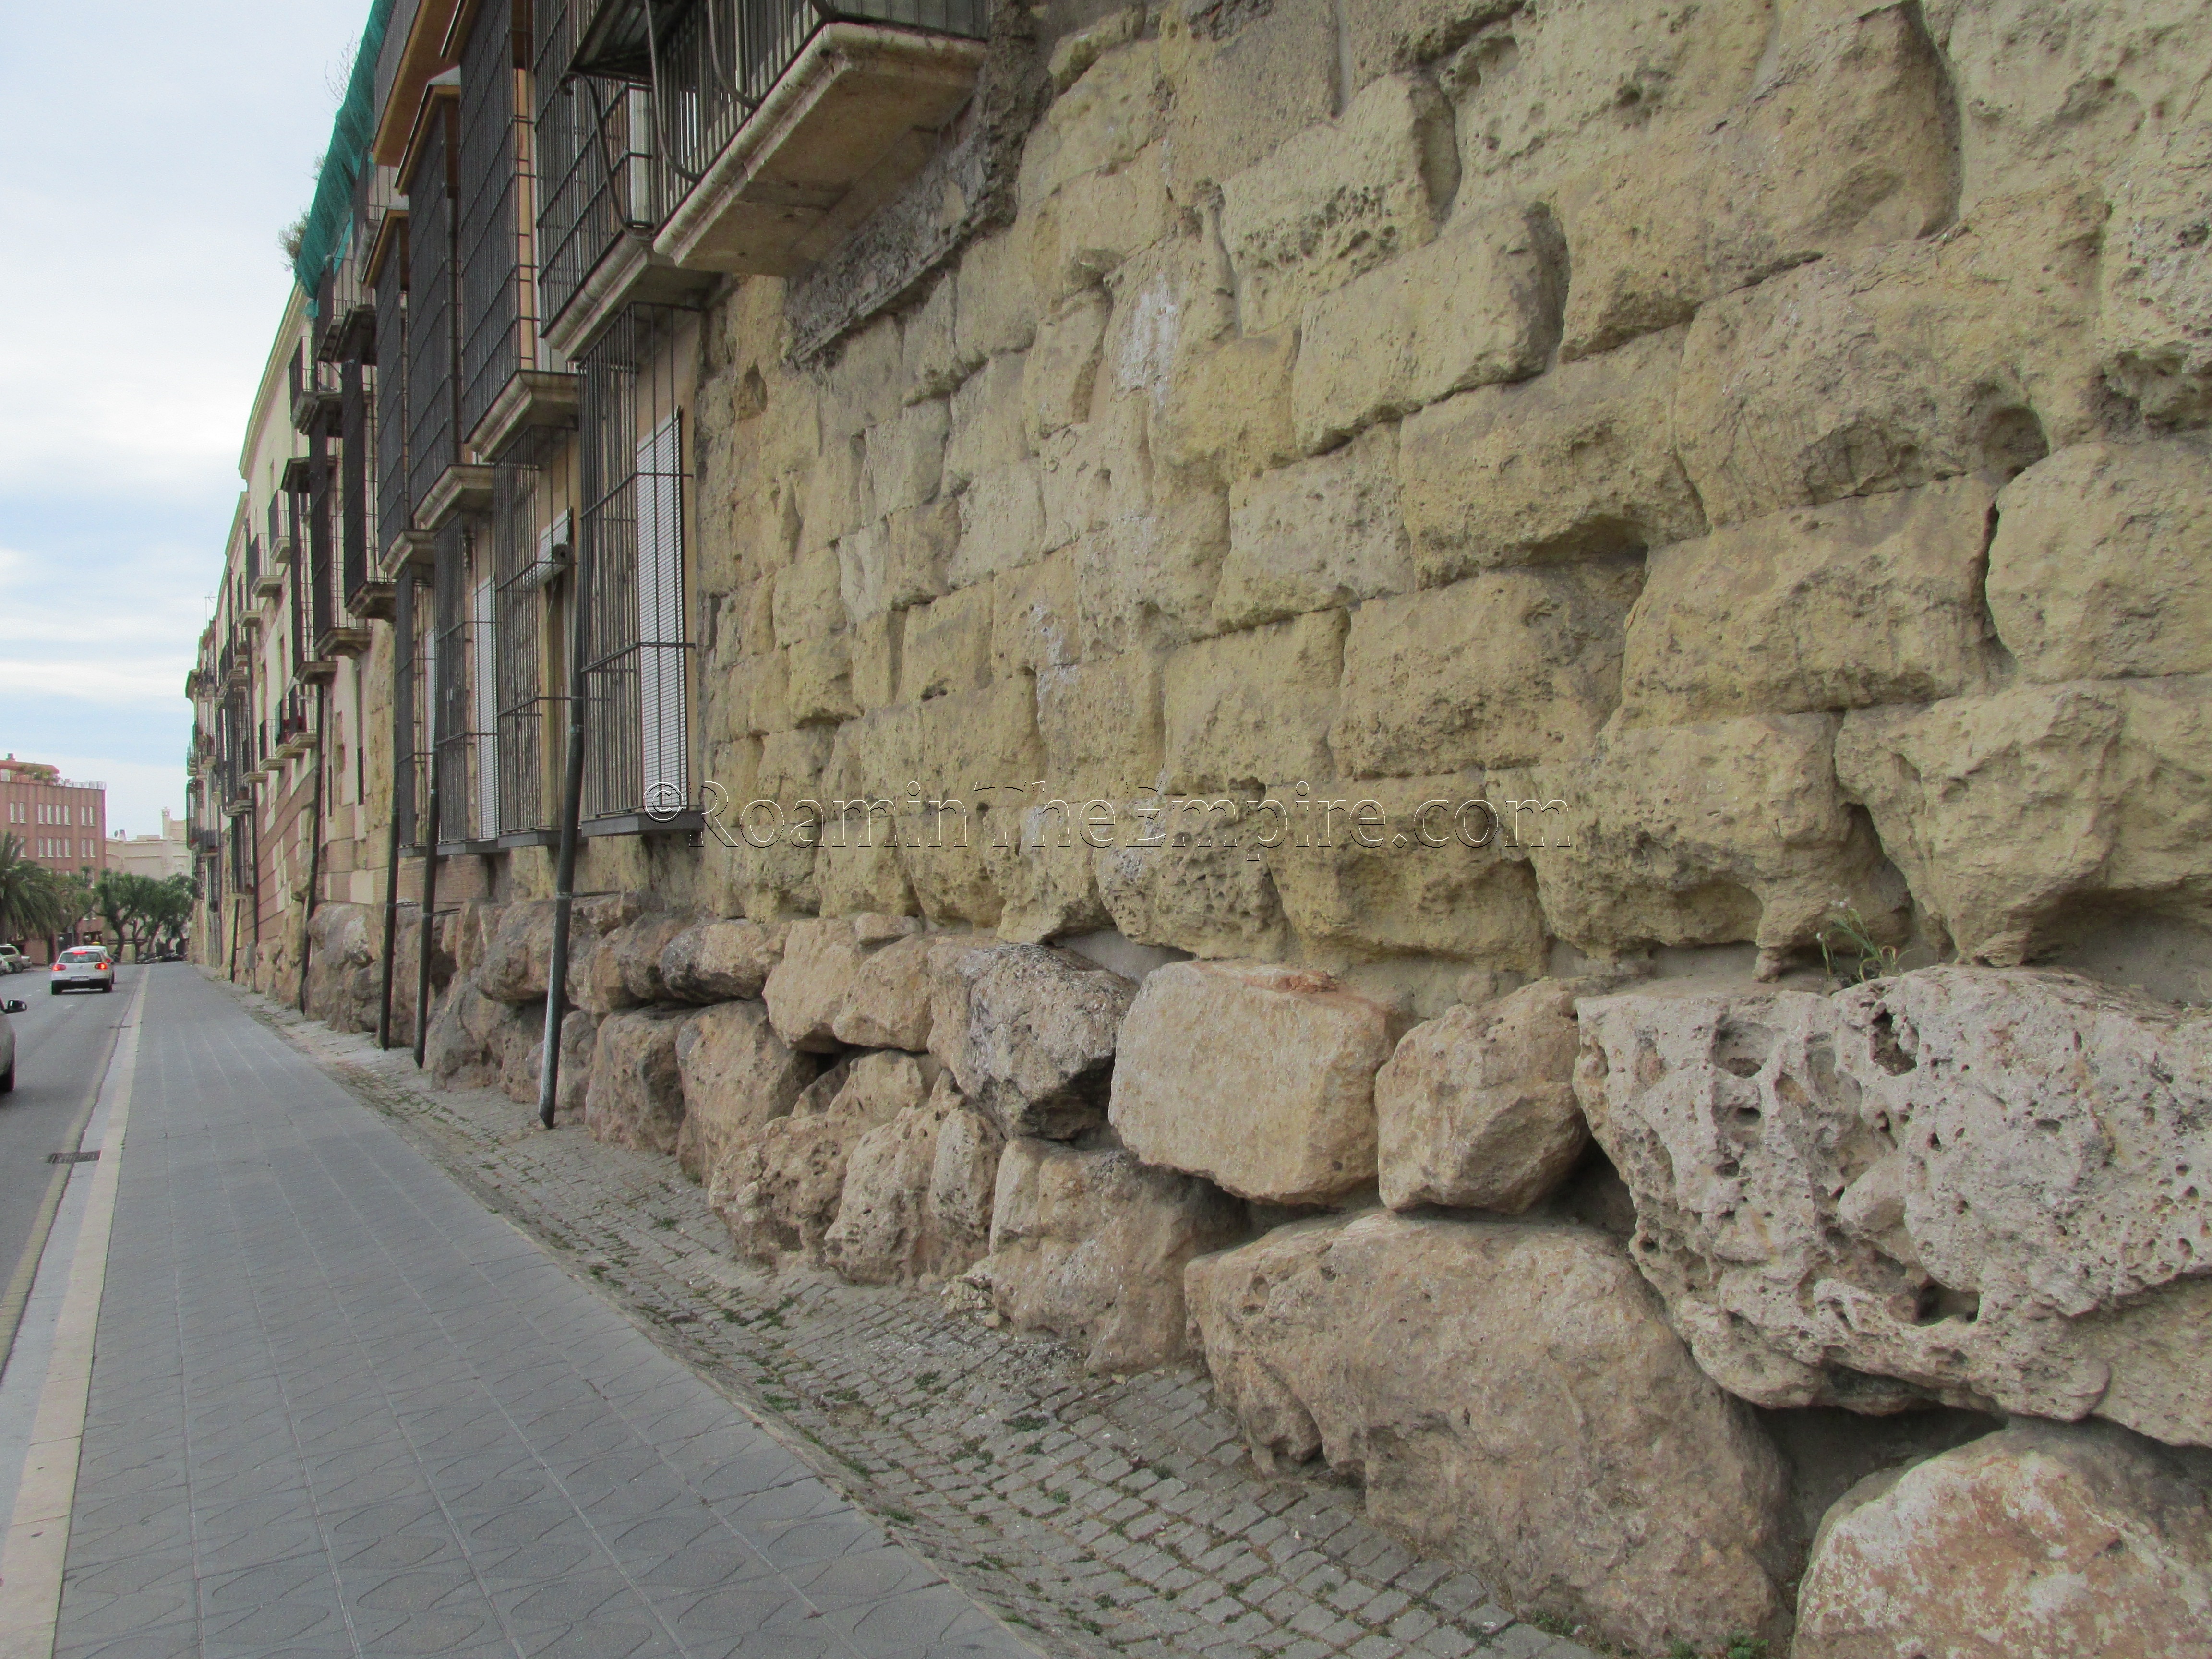 Section of the walls with first and second phase of Roman construction along Passeig de Sant Antoni.